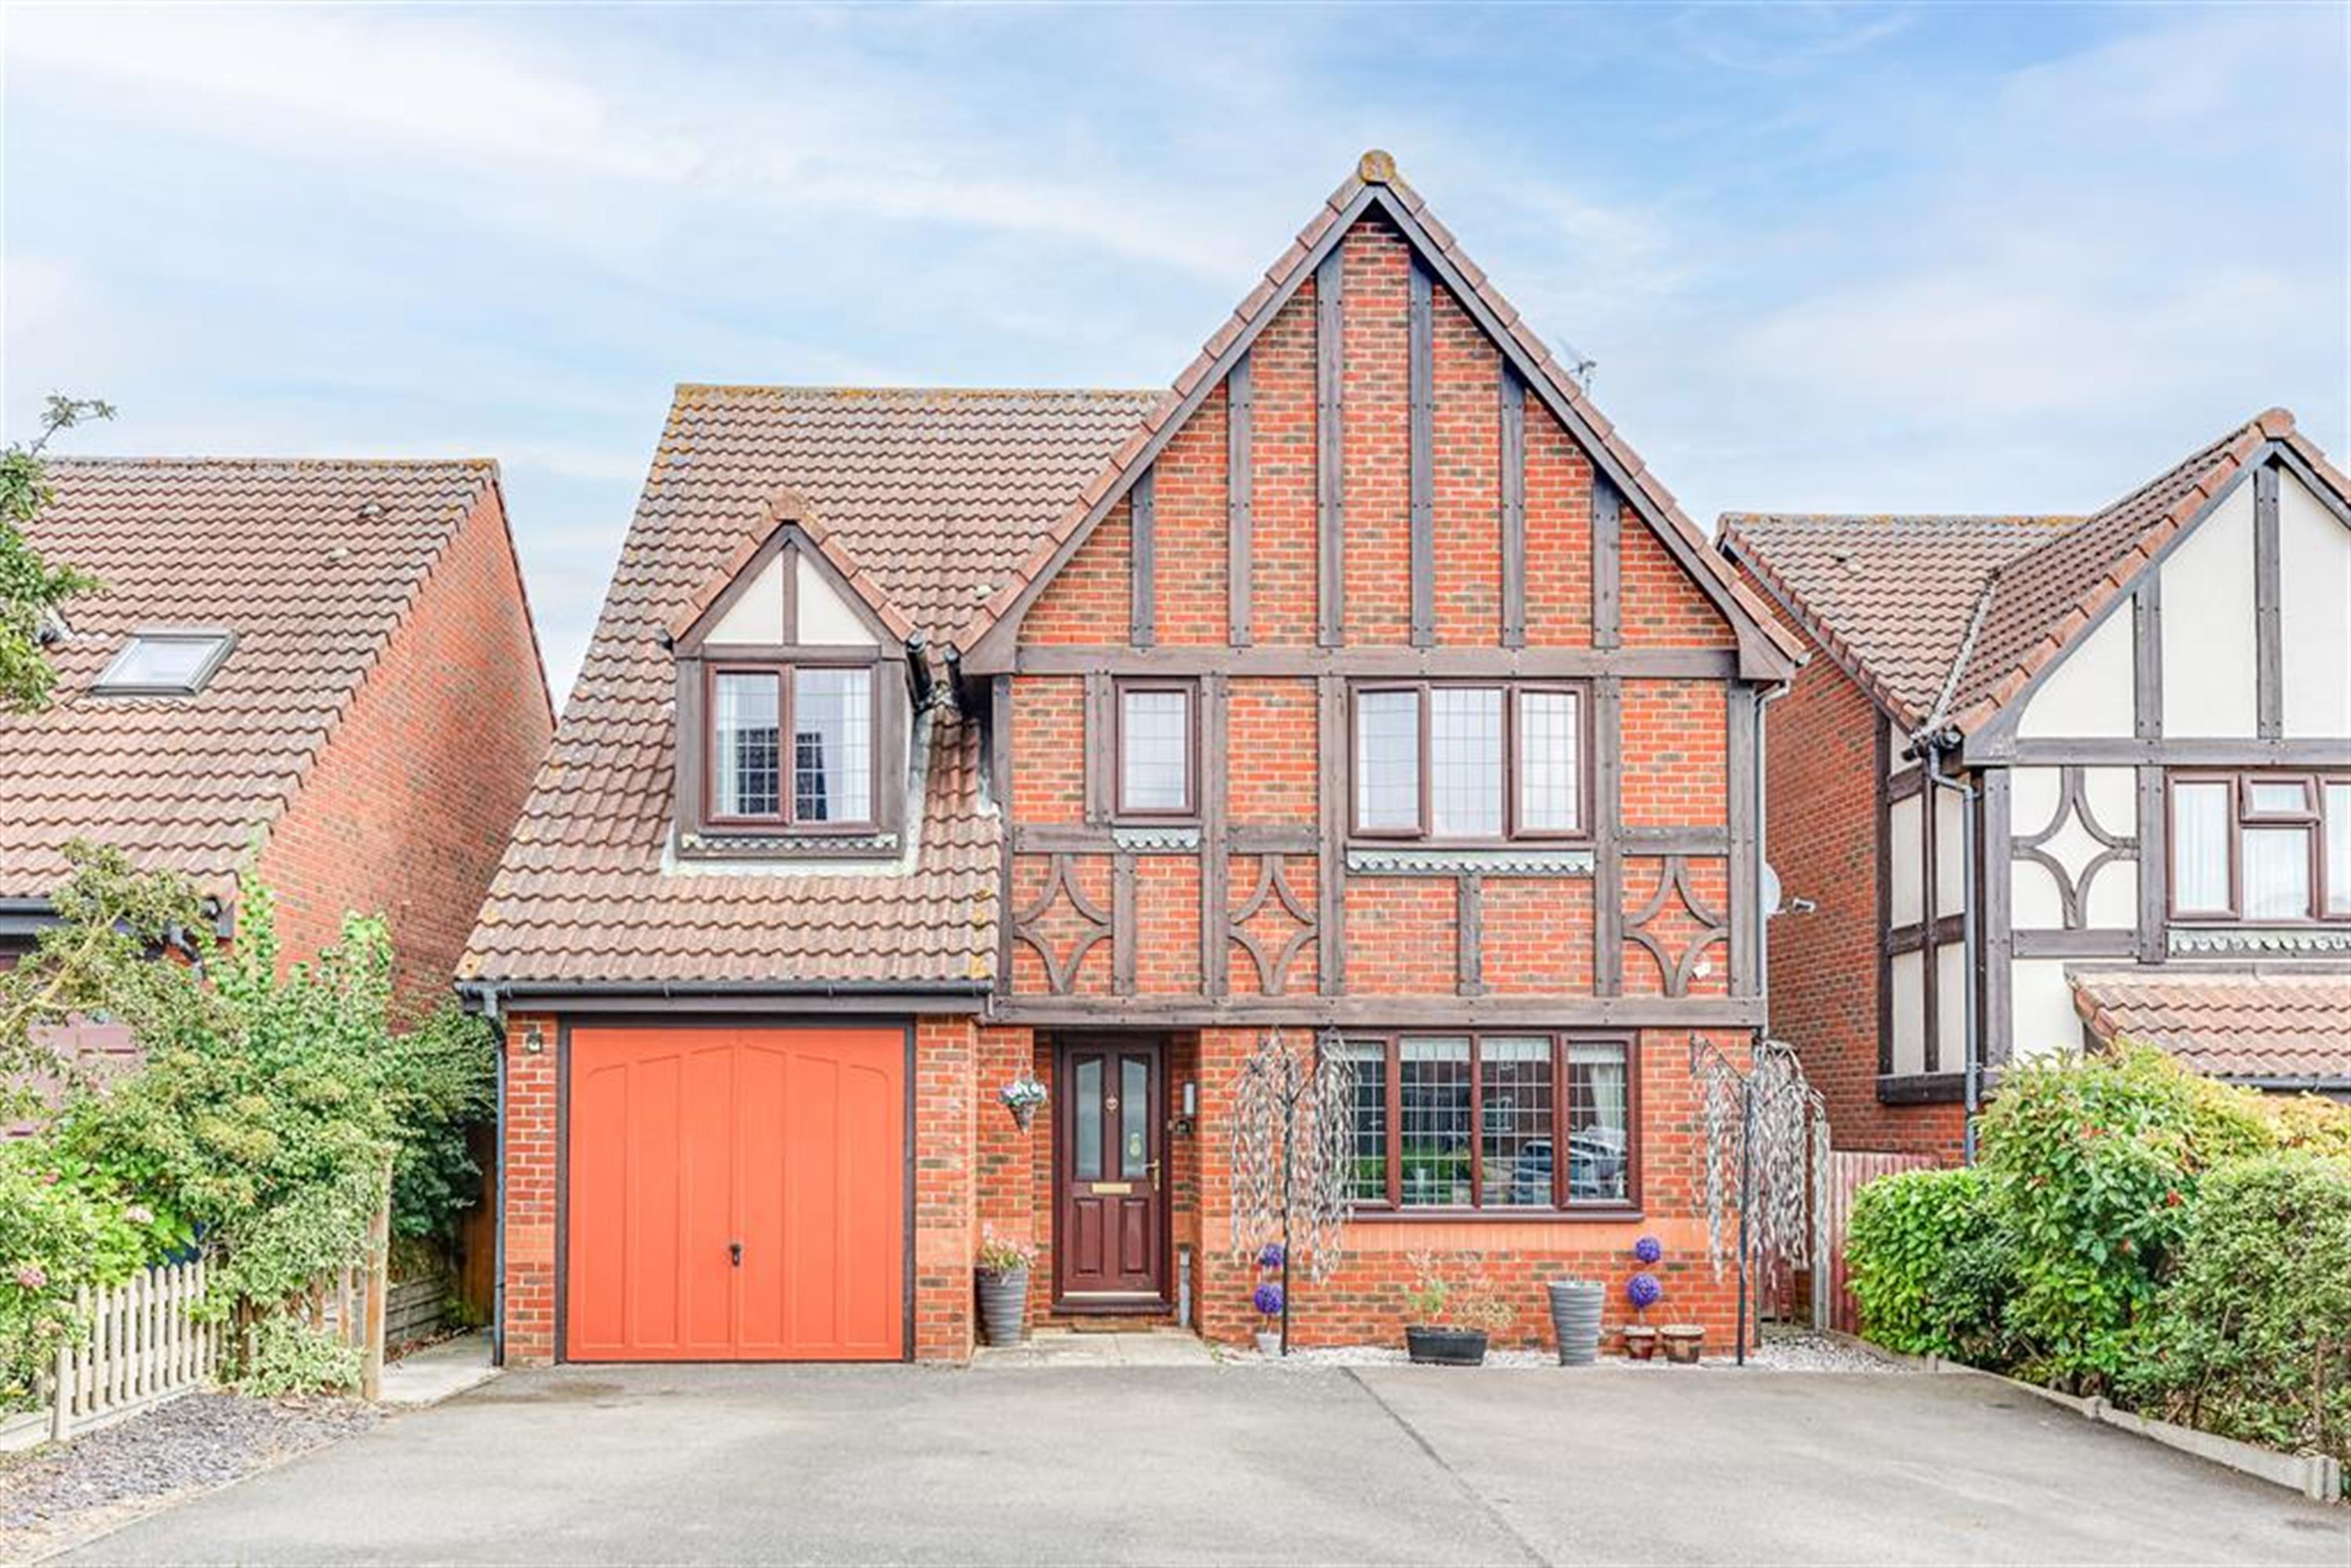 Campbell Close, Buntingford, SG9 9BY